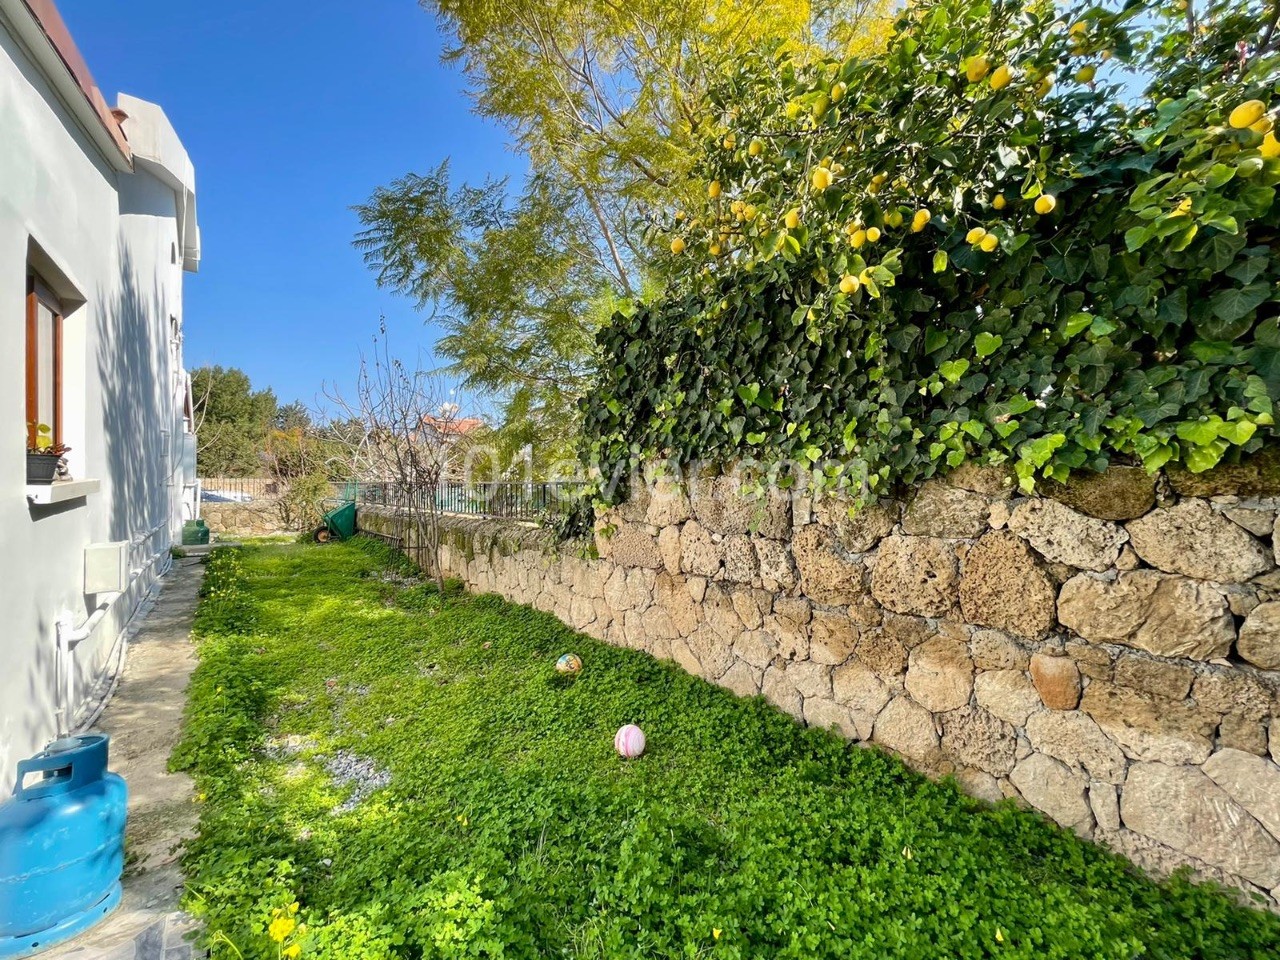 2+1 detached house for sale in Doğanköy with detached garden and separate kitchen ** 